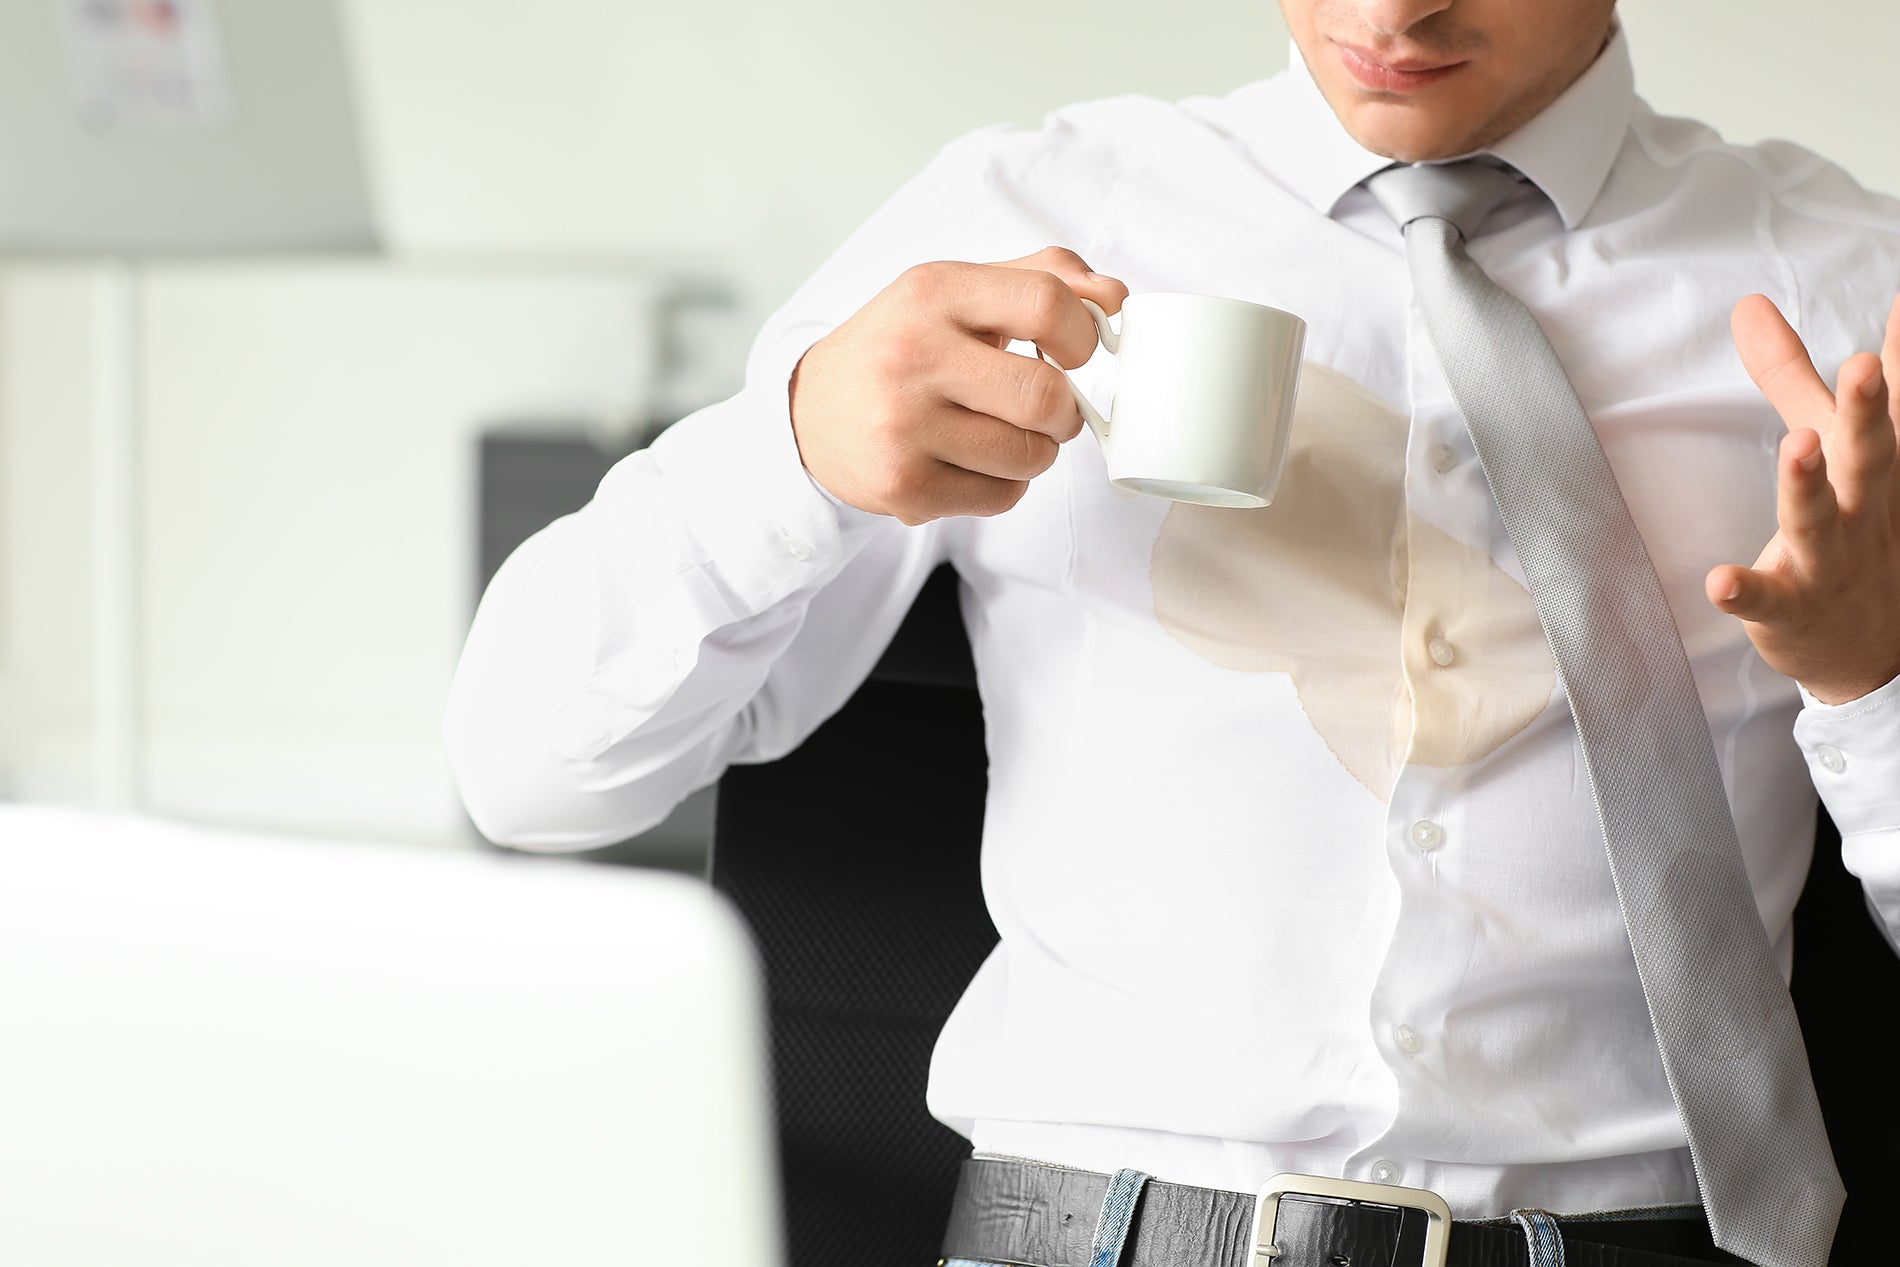 How to Get Stains Off Your Shirt or Suit at Work